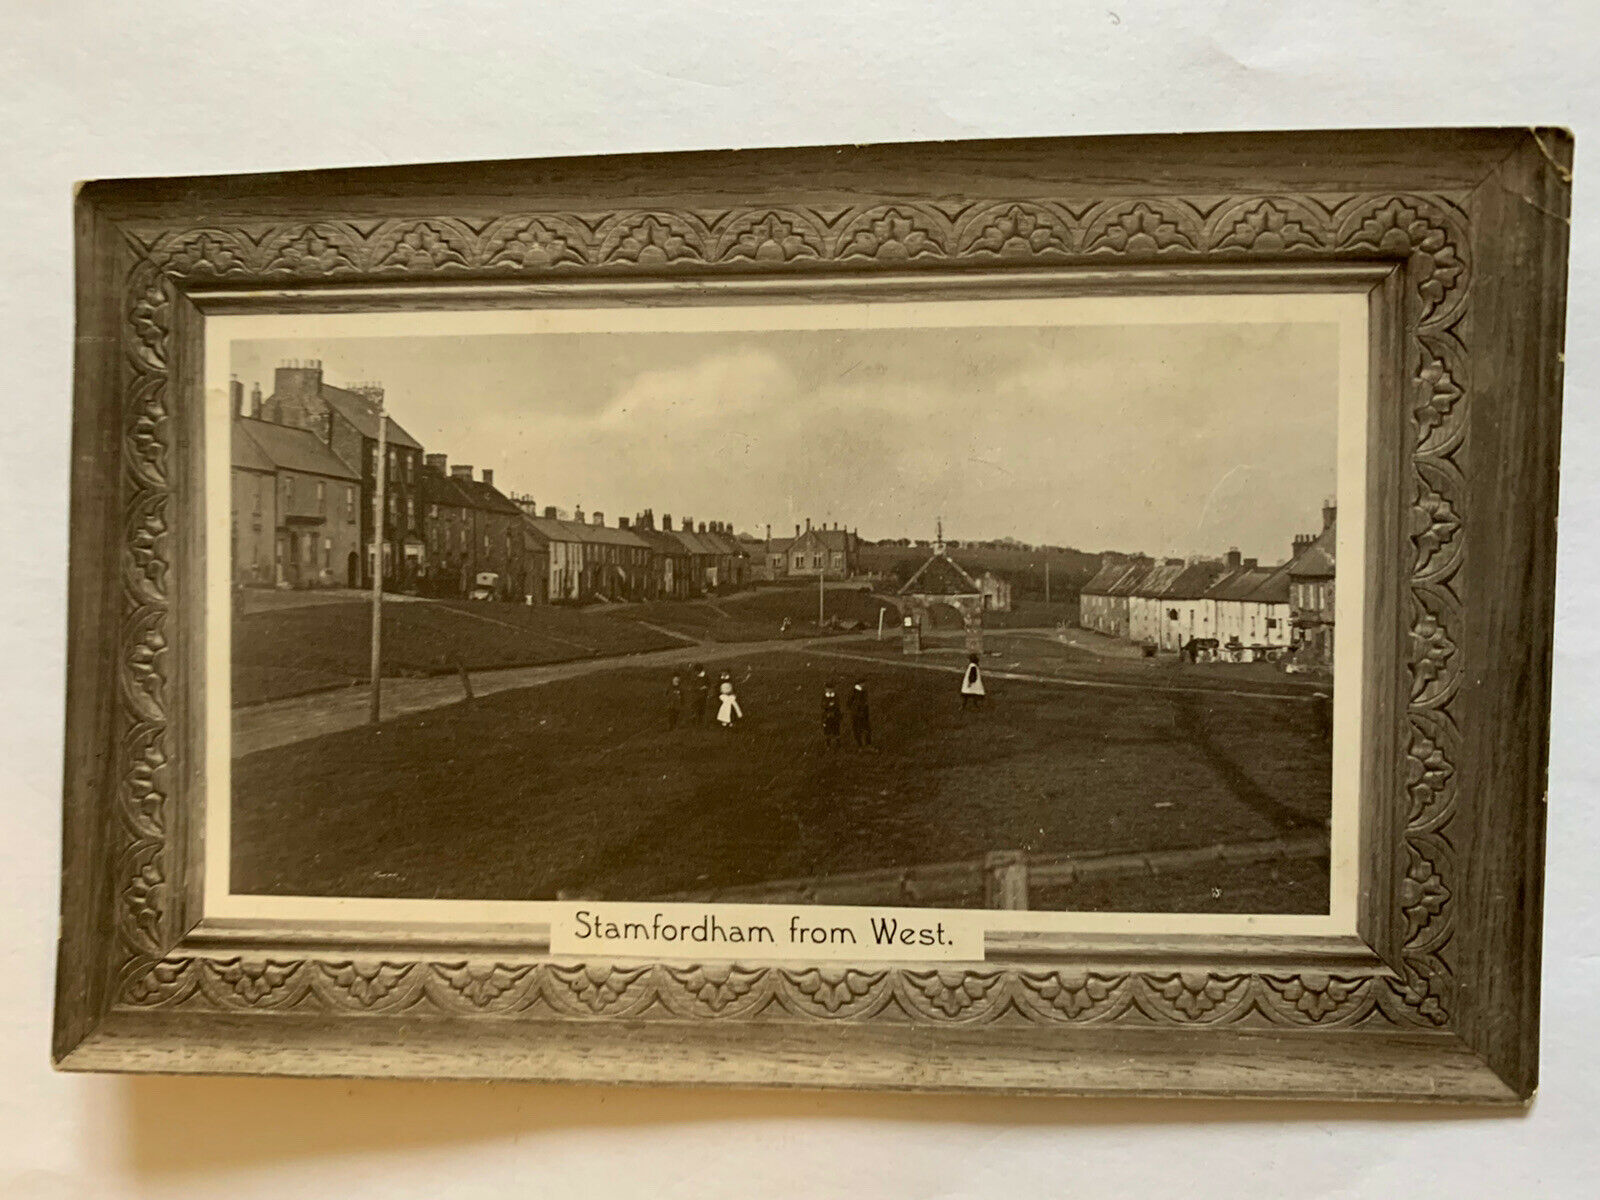 House Clearance - Real Photo Service RPPC STAMFORDHAM VILLAGE LOOKING WEST - NORTHUMBERLAND 1912